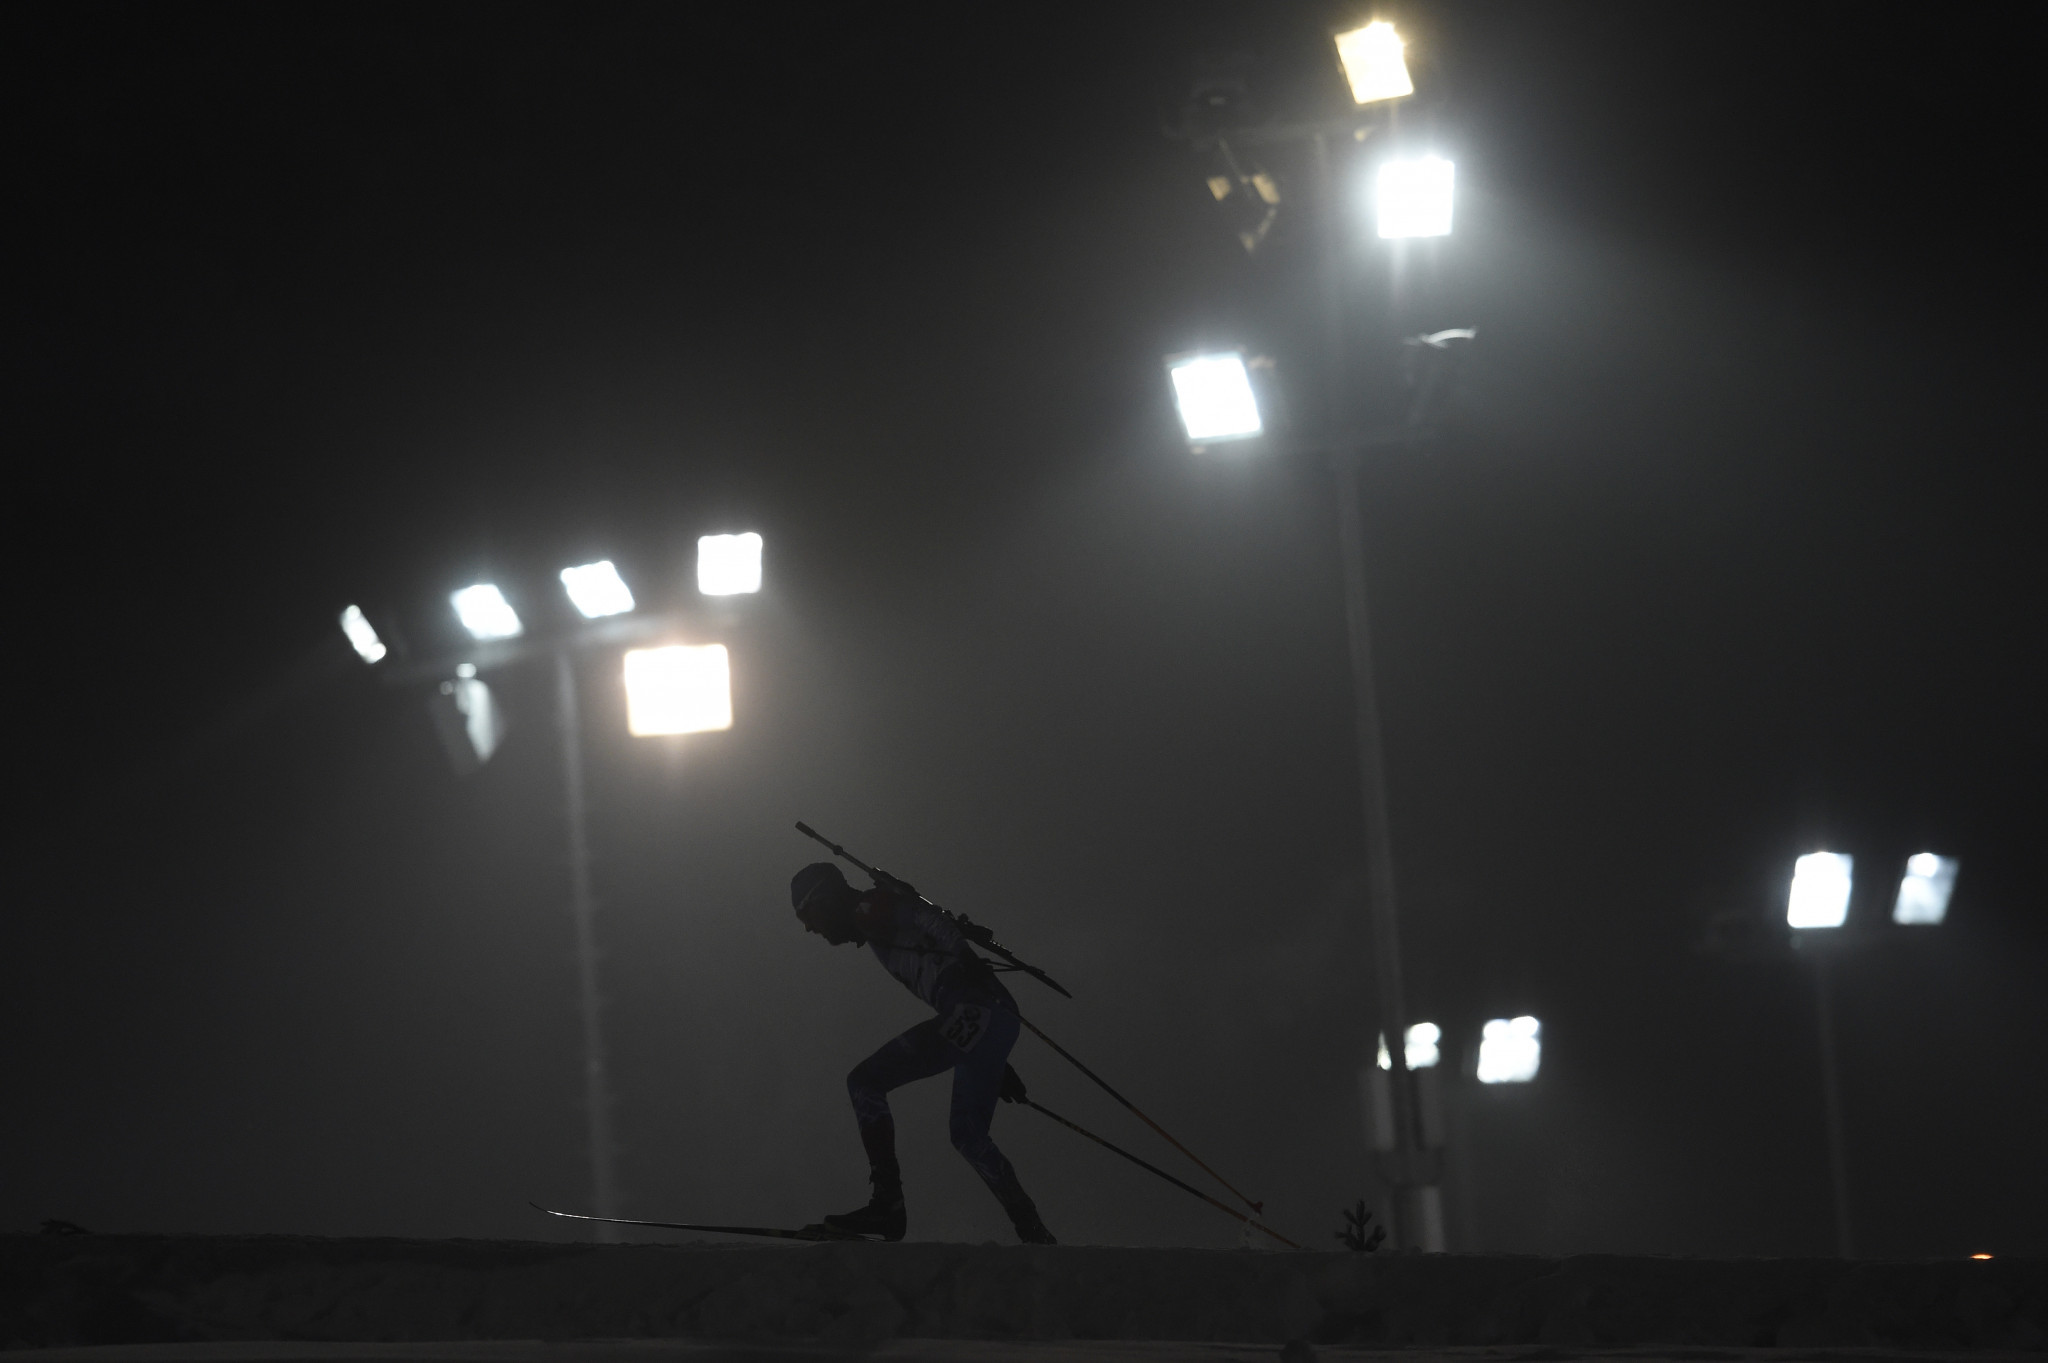 The floodlight competition saw an impressive accuracy in biathletes' shooting ©Getty Images